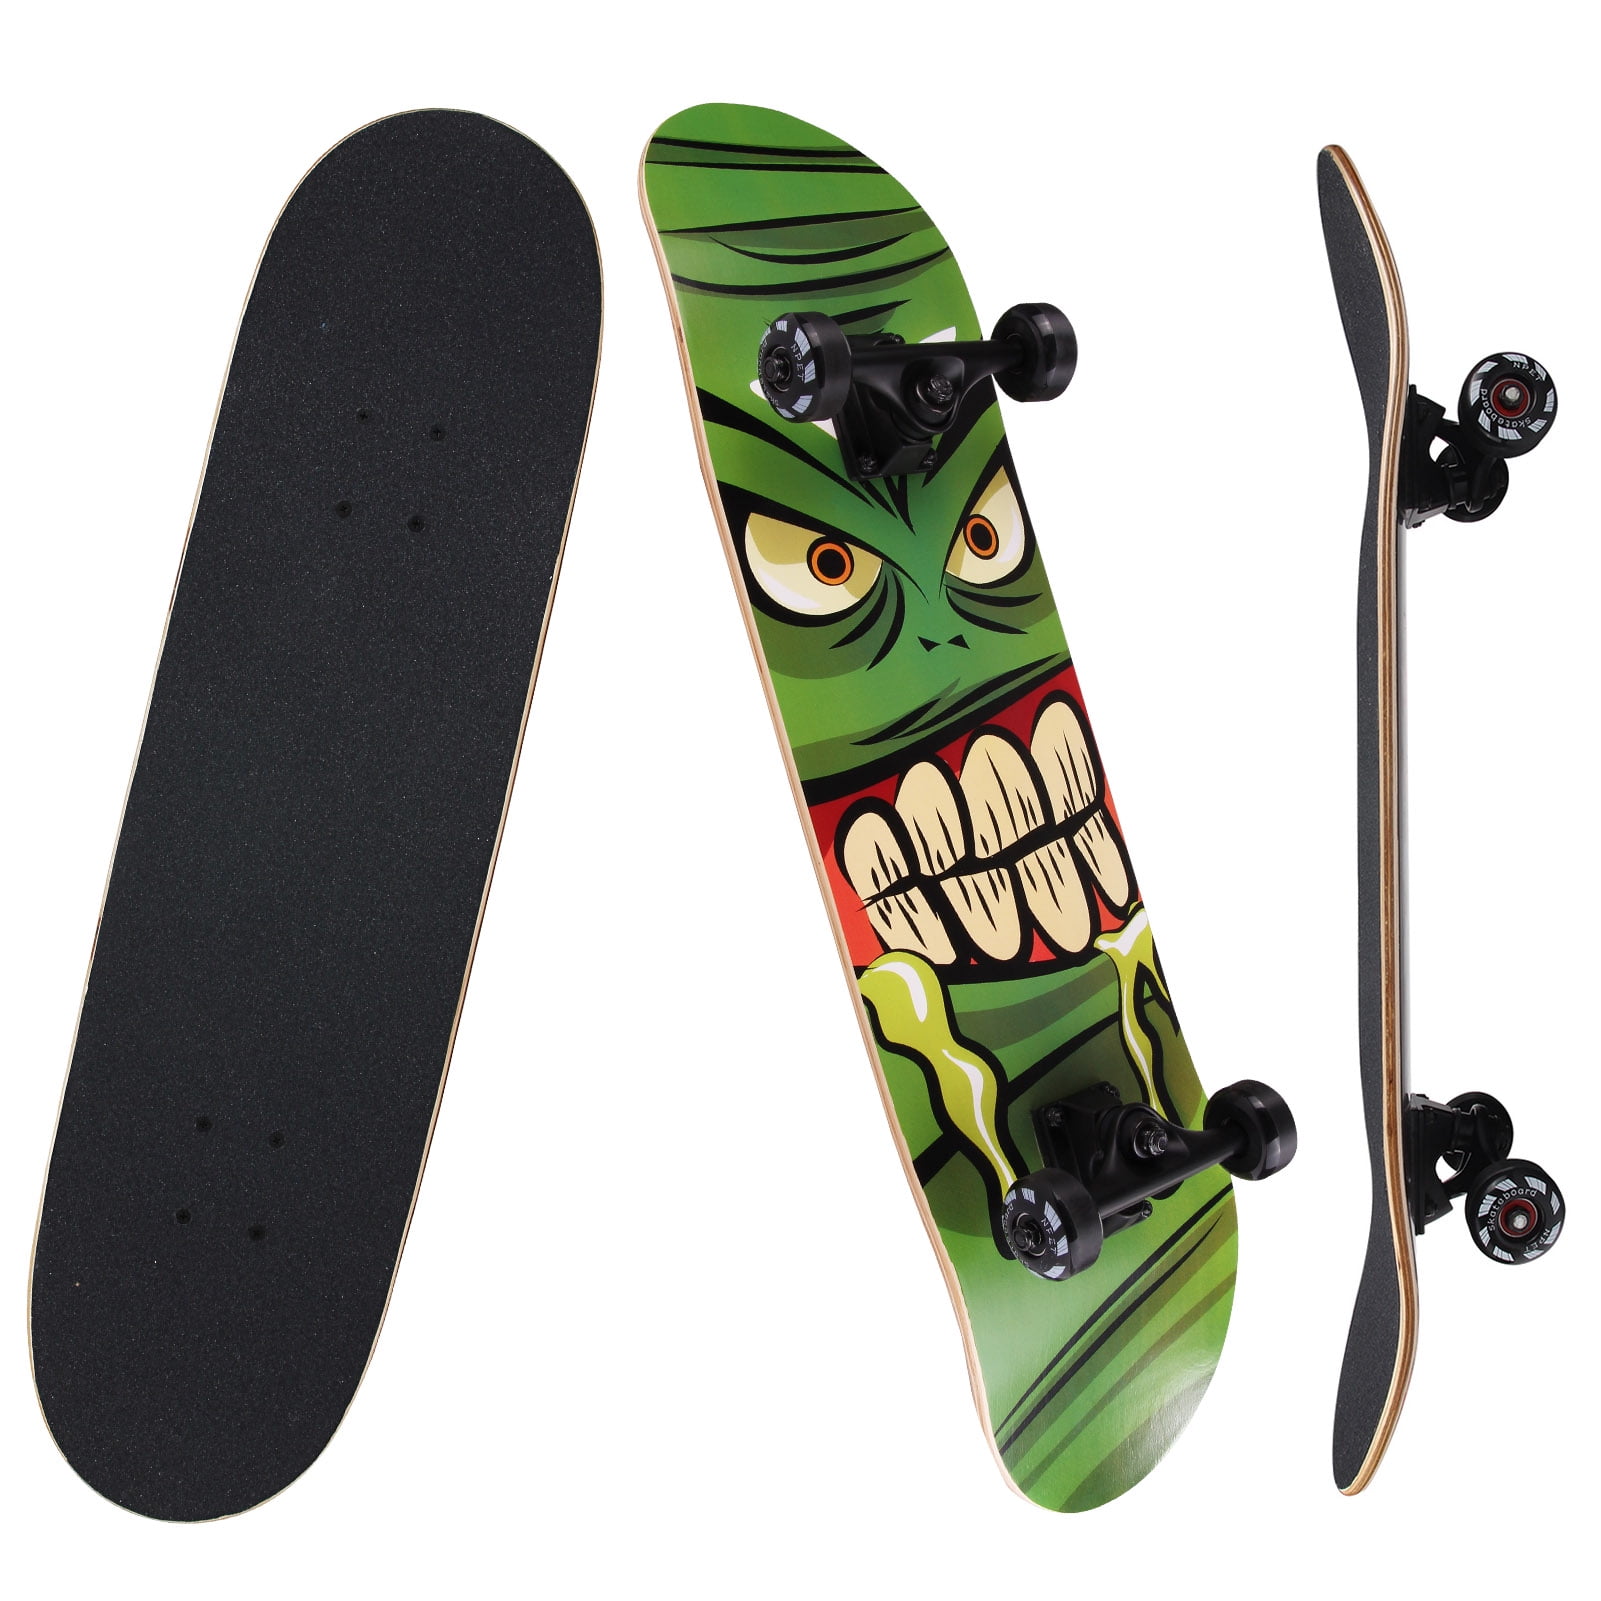 NPET Pro Skateboard Complete 31 Inch, 7 Layer Canadian Maple